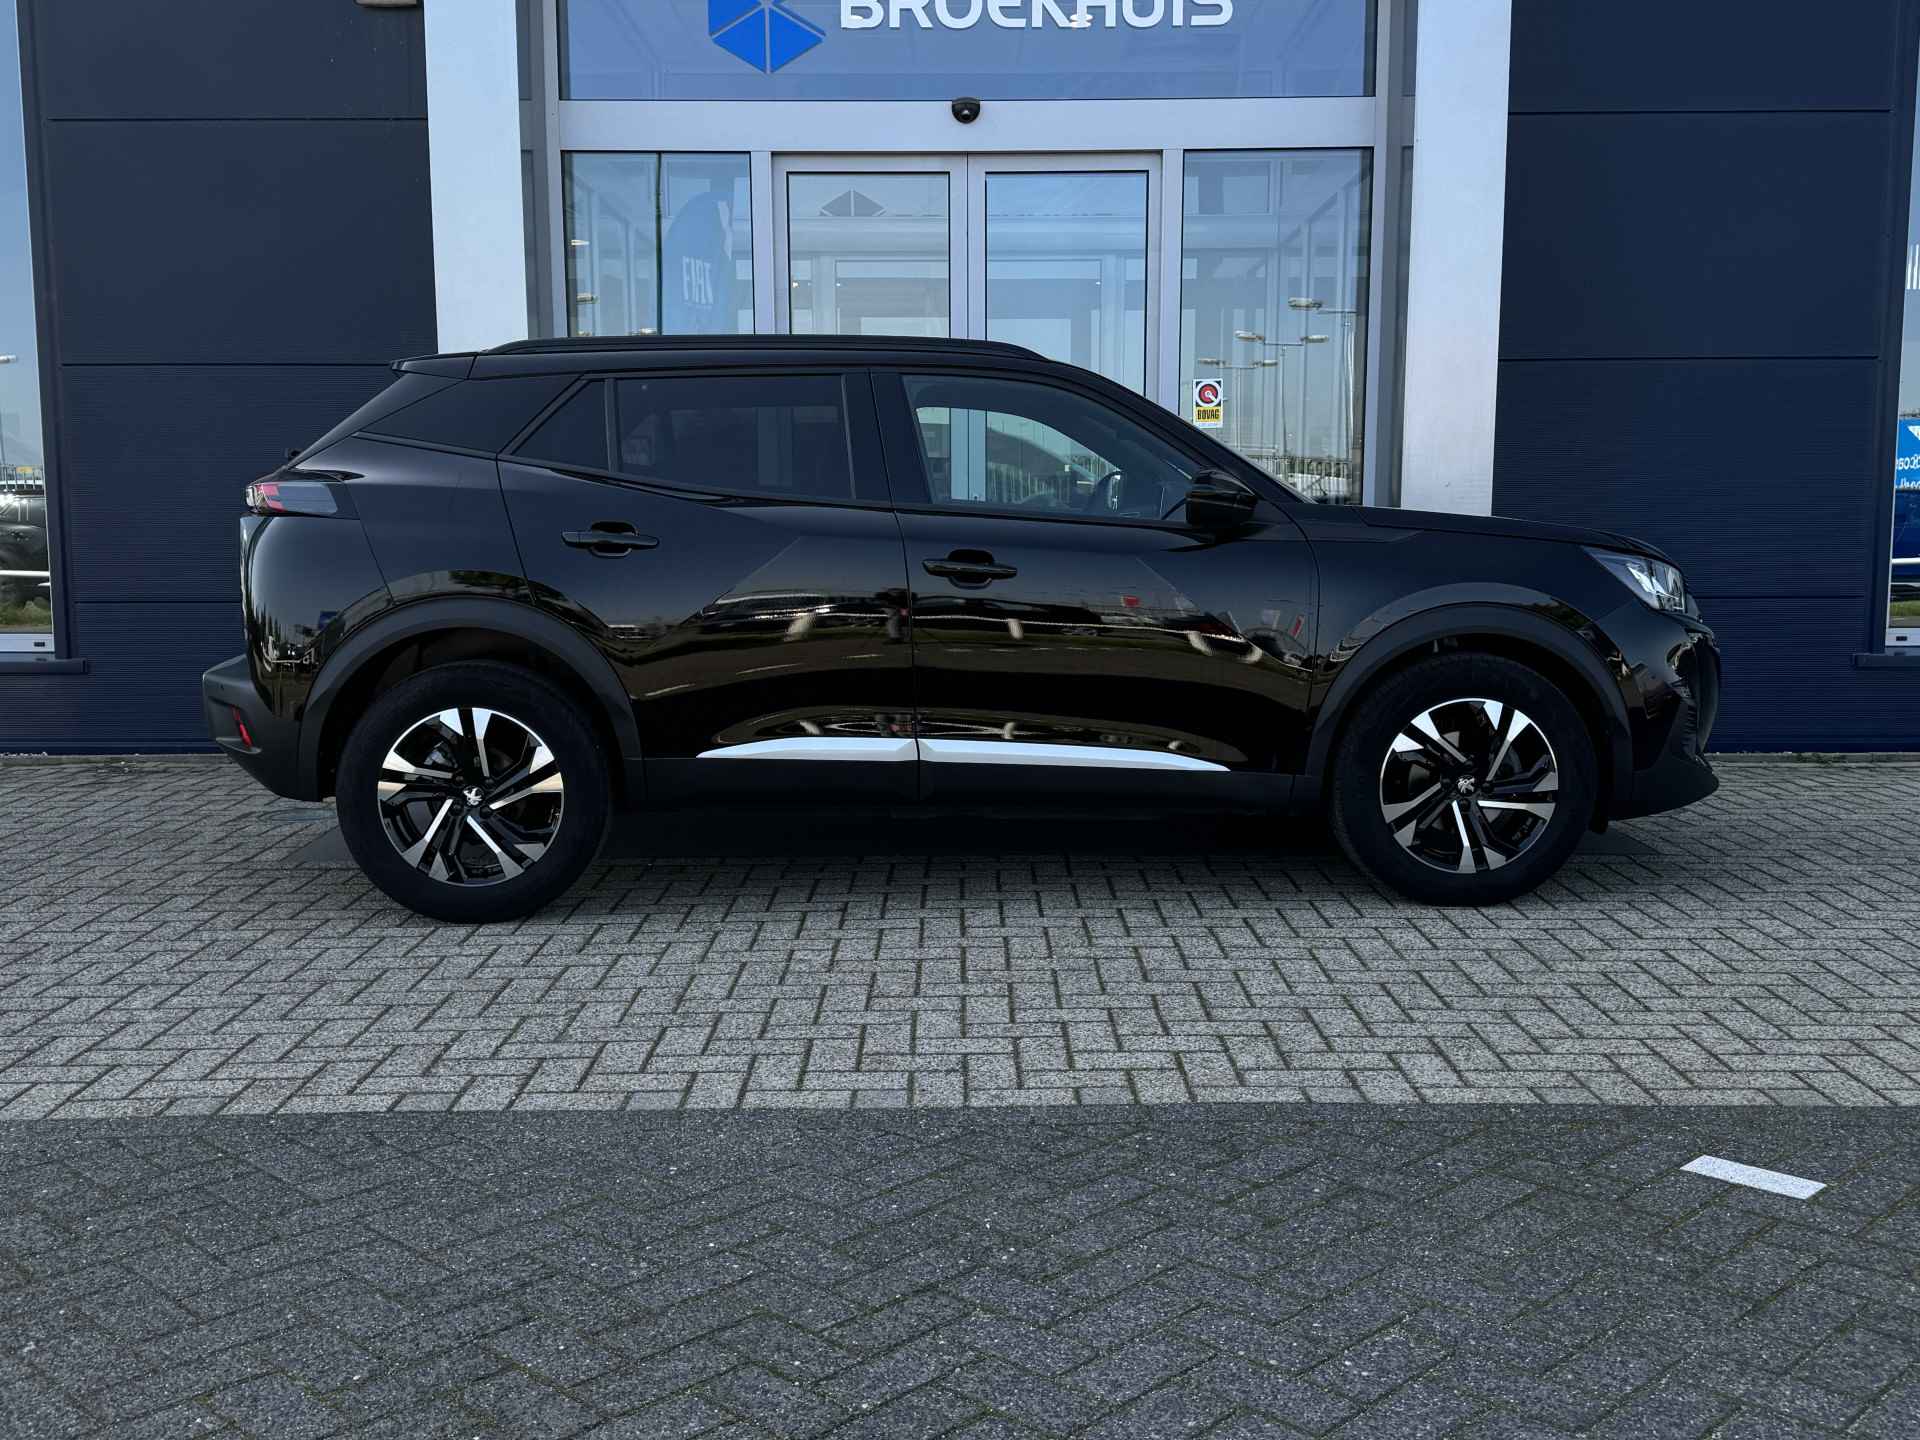 Peugeot 2008 1.2 100PK Allure | PDC achter | Climate Control | Cruise Control | Carplay - 8/29